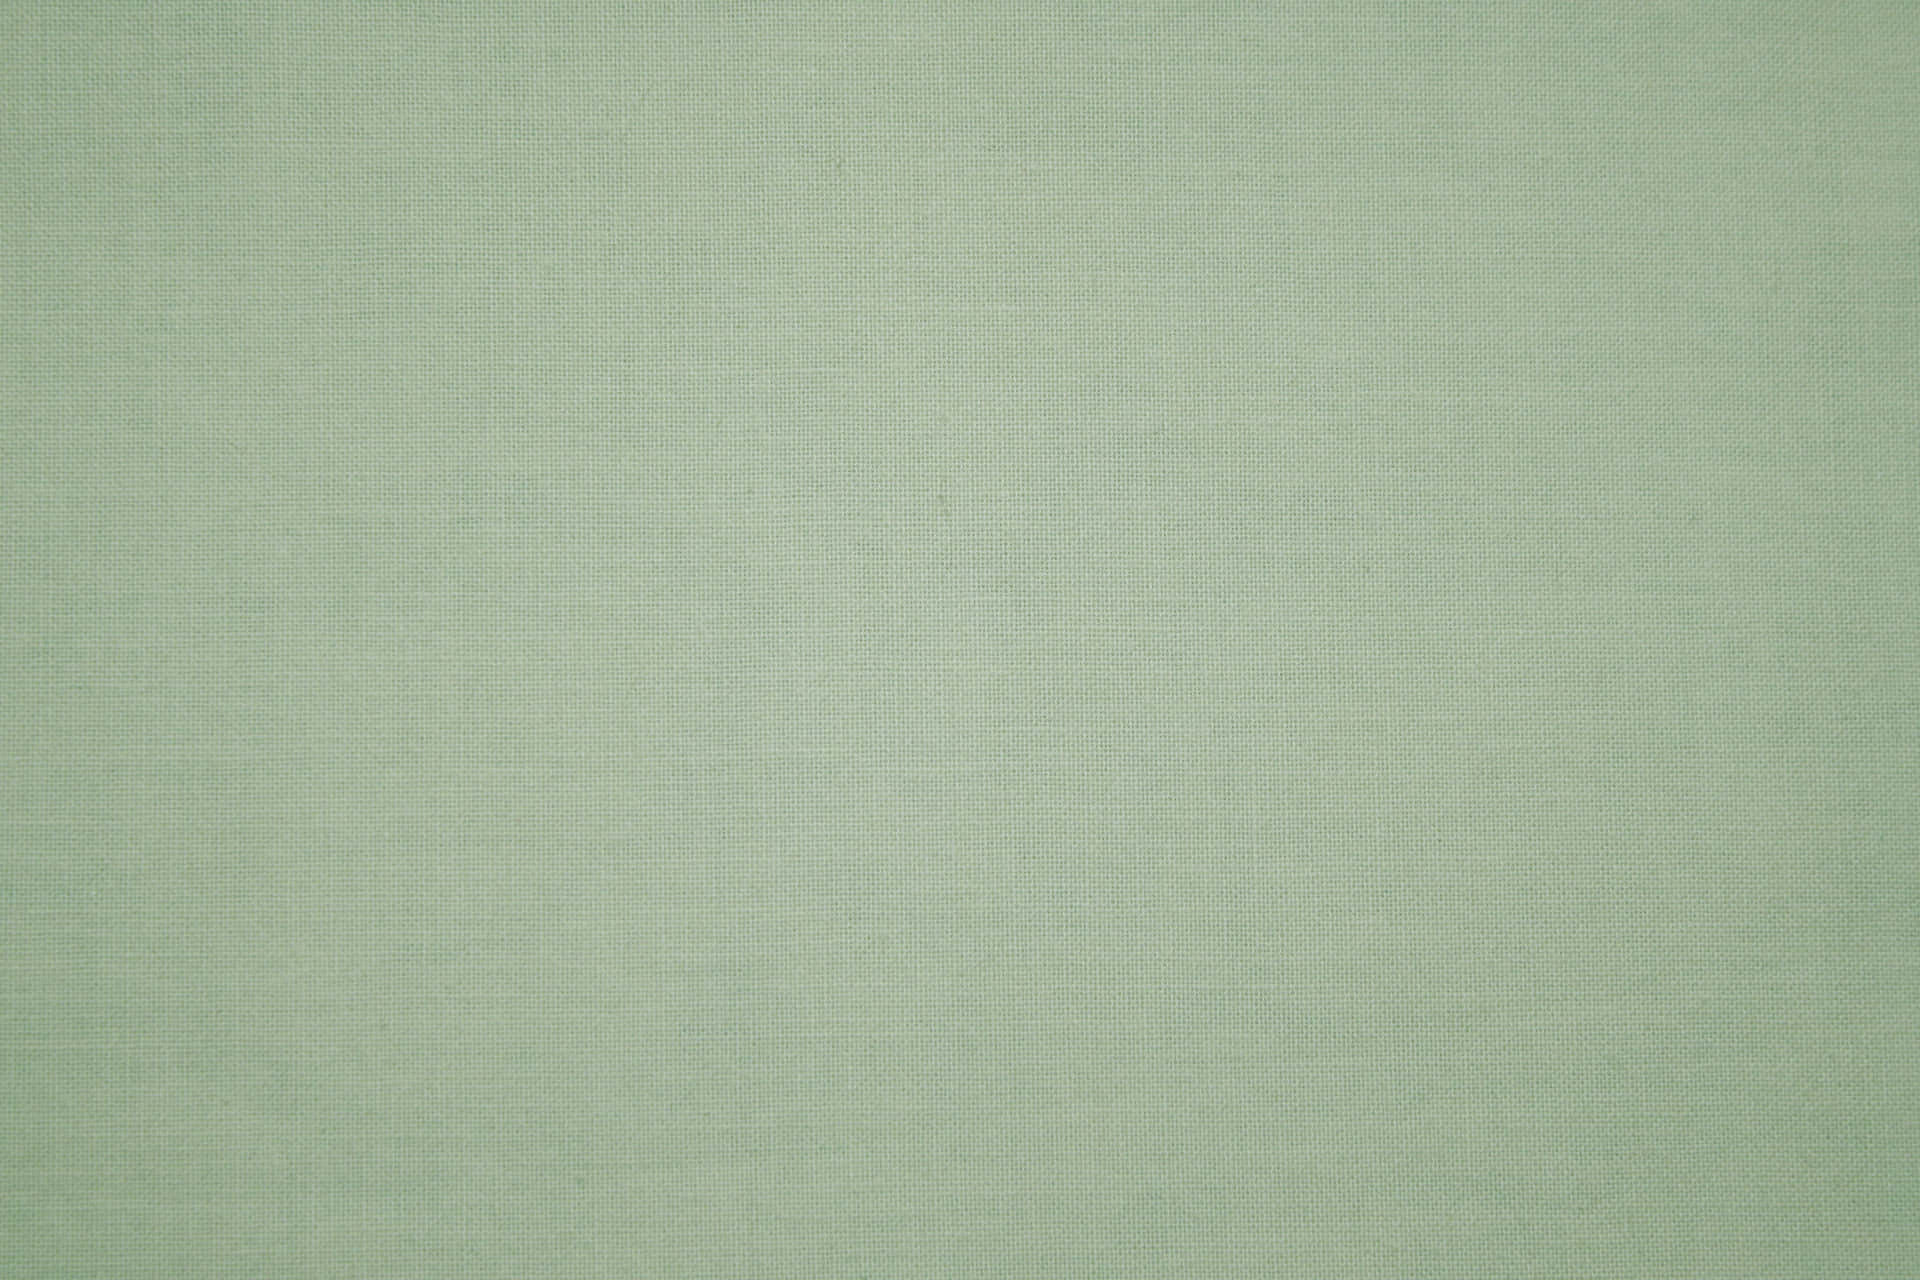 Simplistic Beauty of a Light Sage Green Background